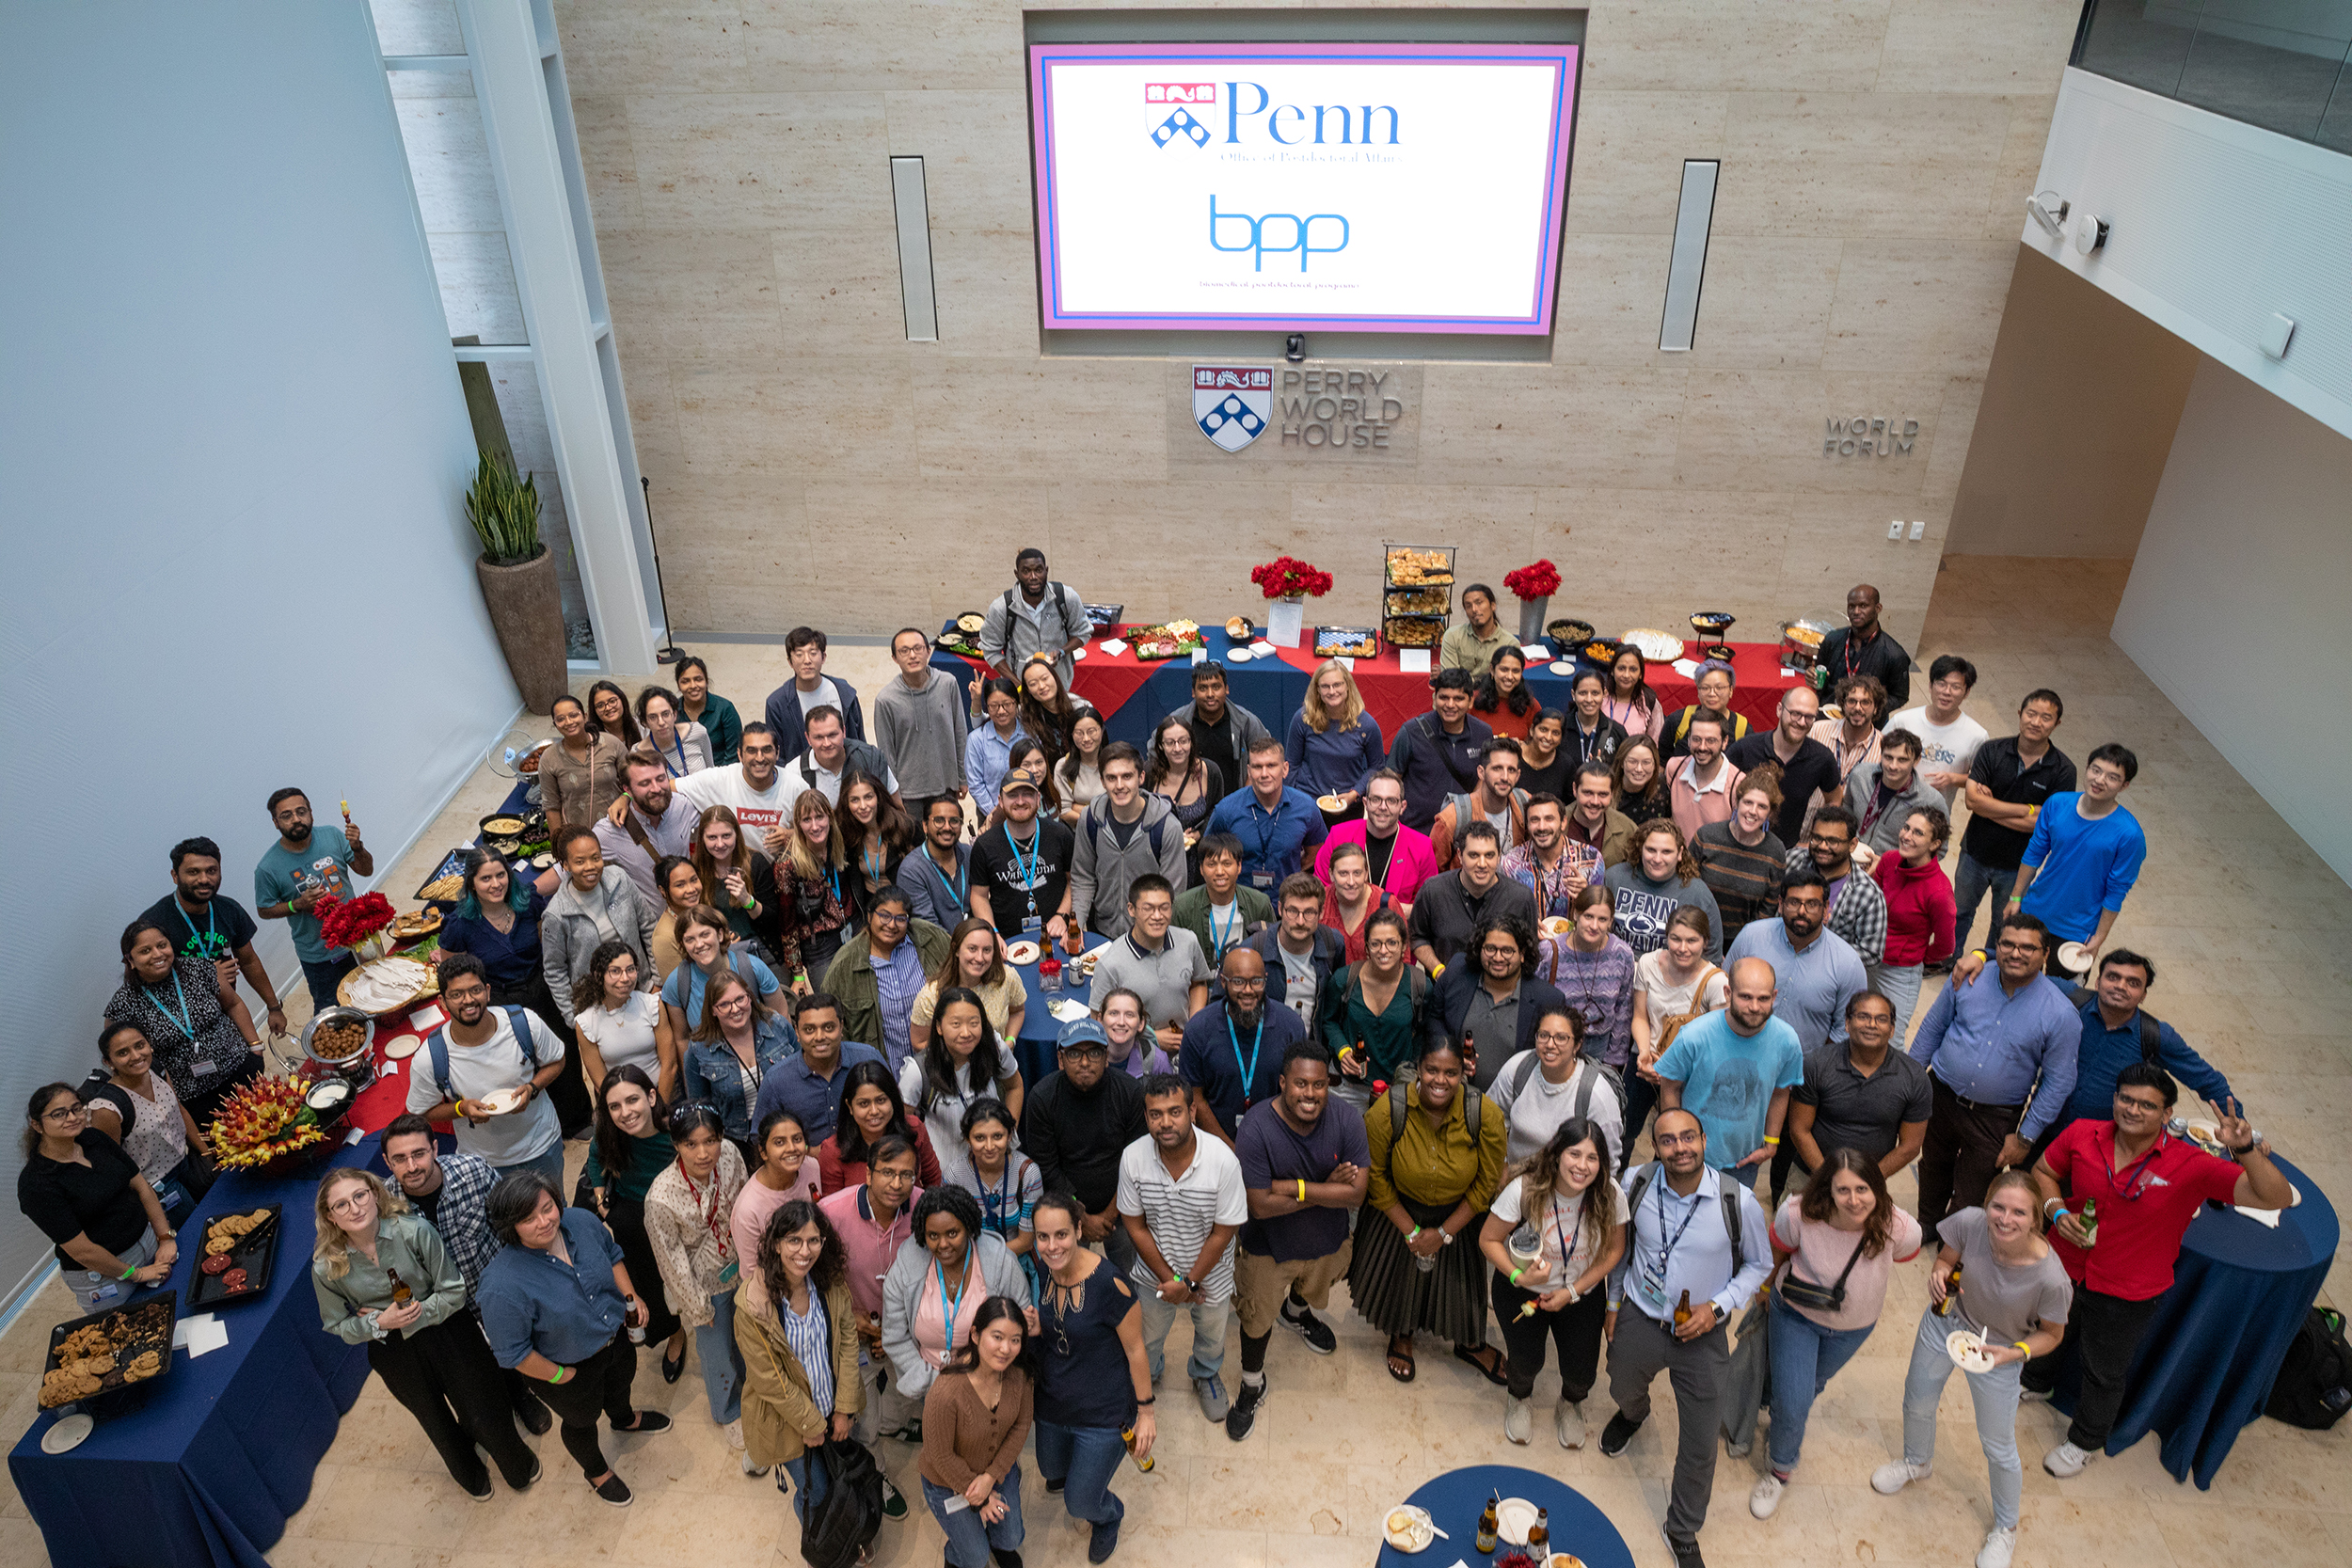 big group of postdocs pose for a photo, photo taken looking down. Screen in background reads: Penn and BPP